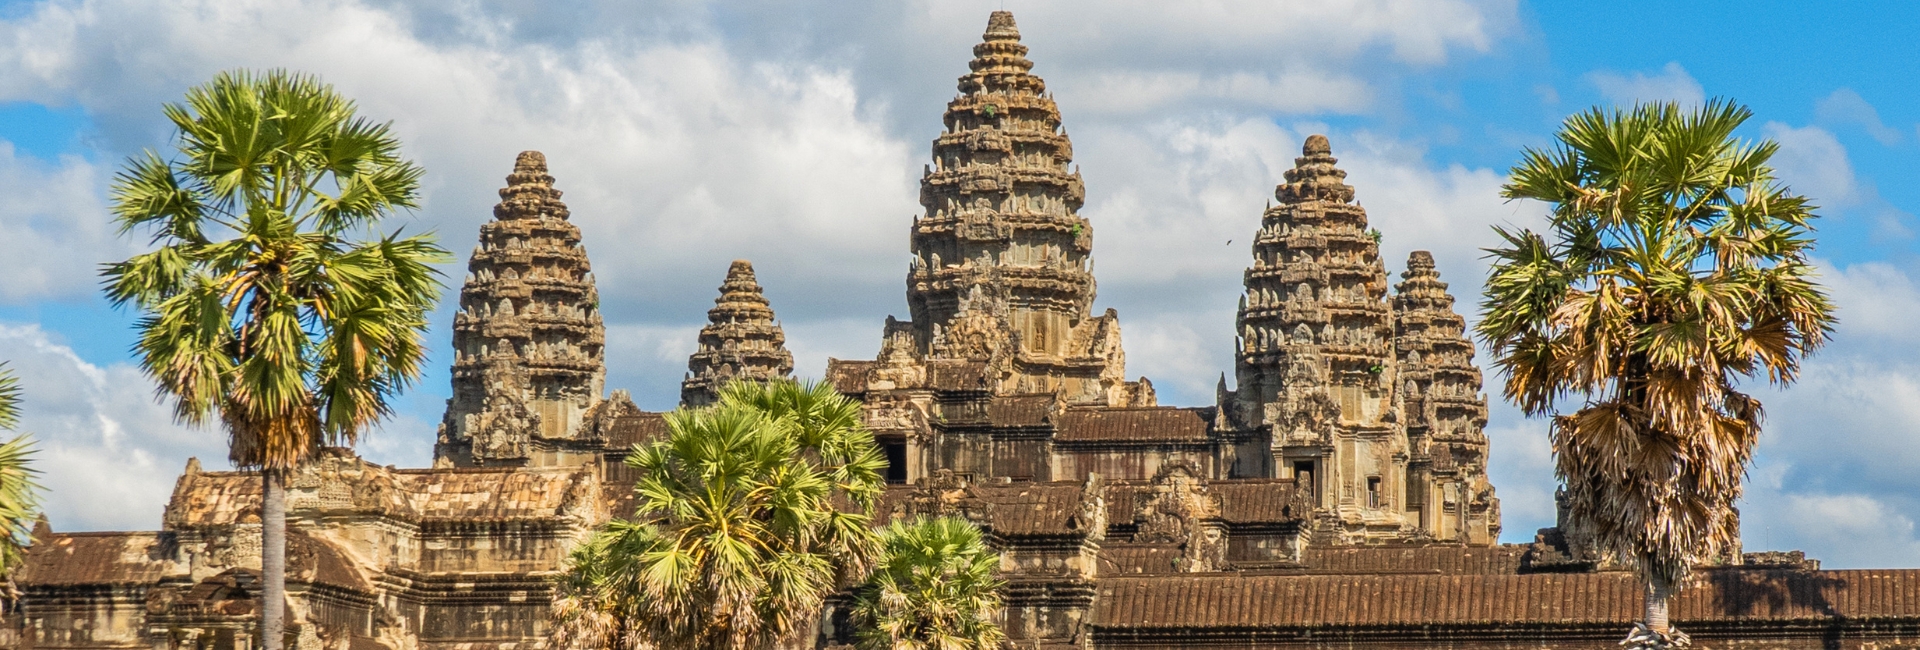 How to get from Siem Reap to Bangkok?